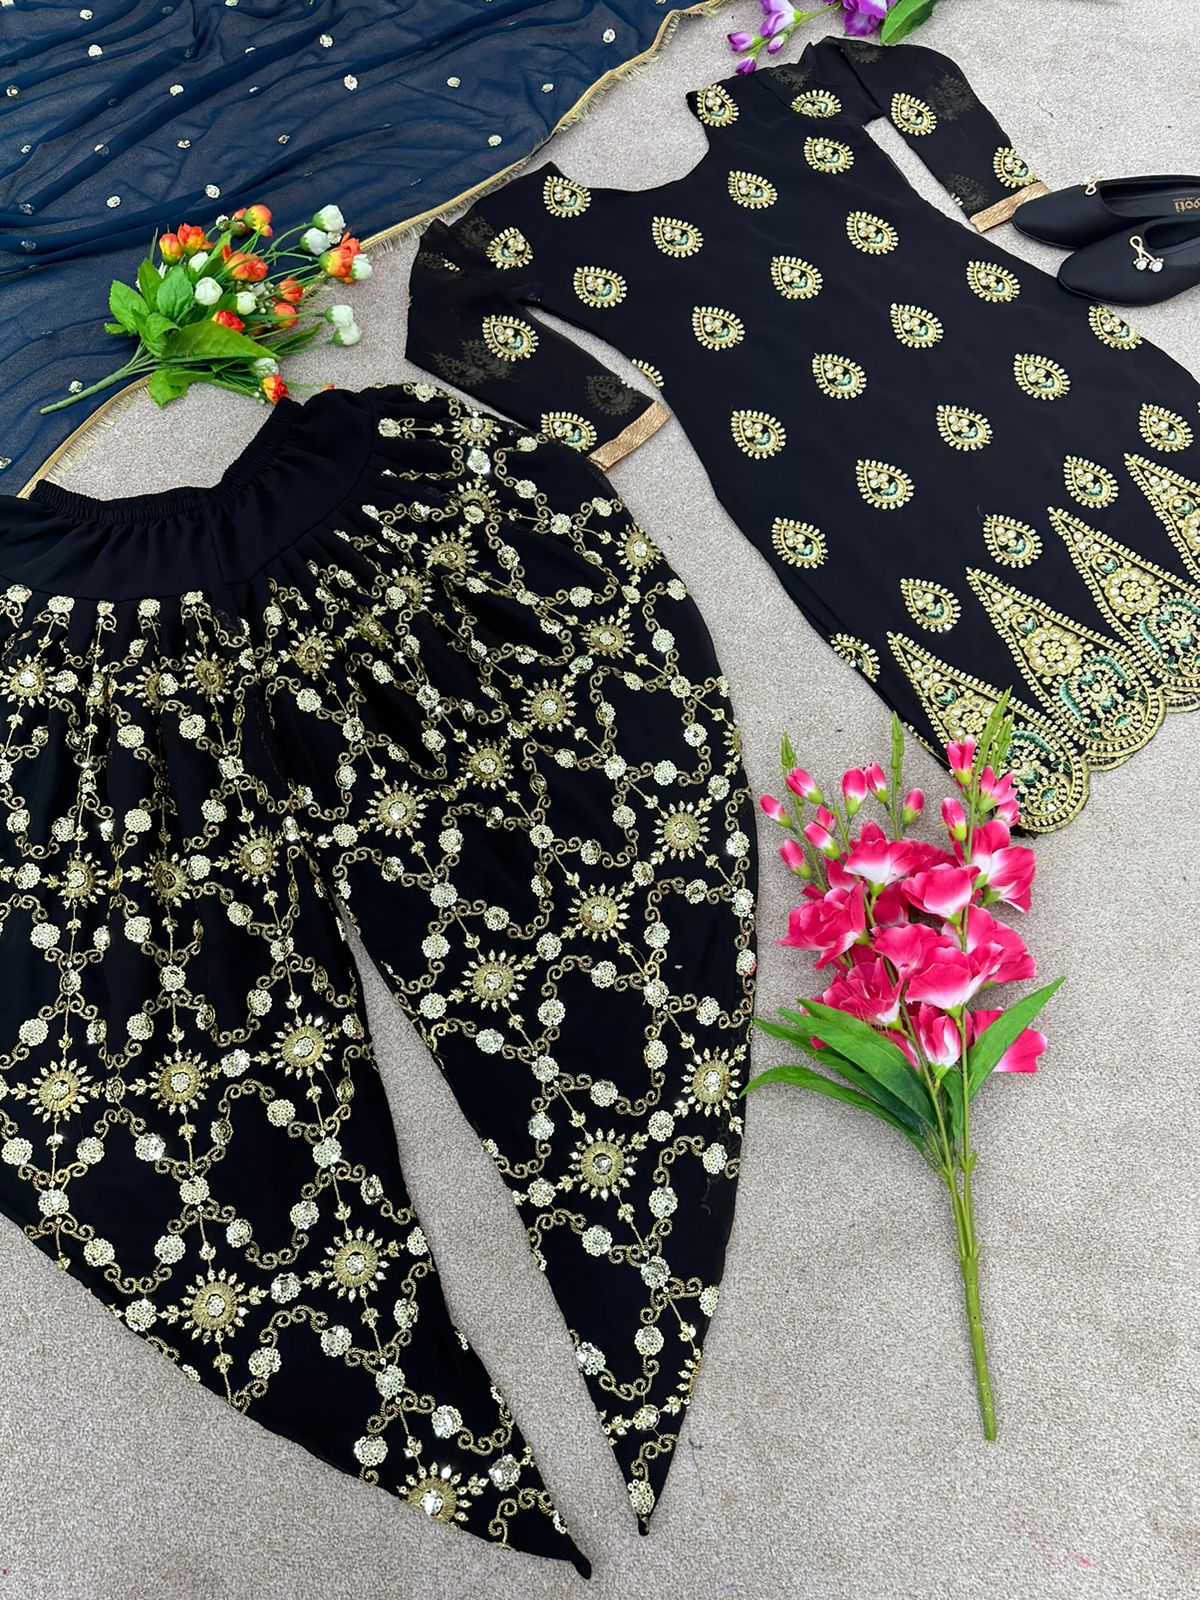 What are tulip pants and why does social media in Pakistan hate them?